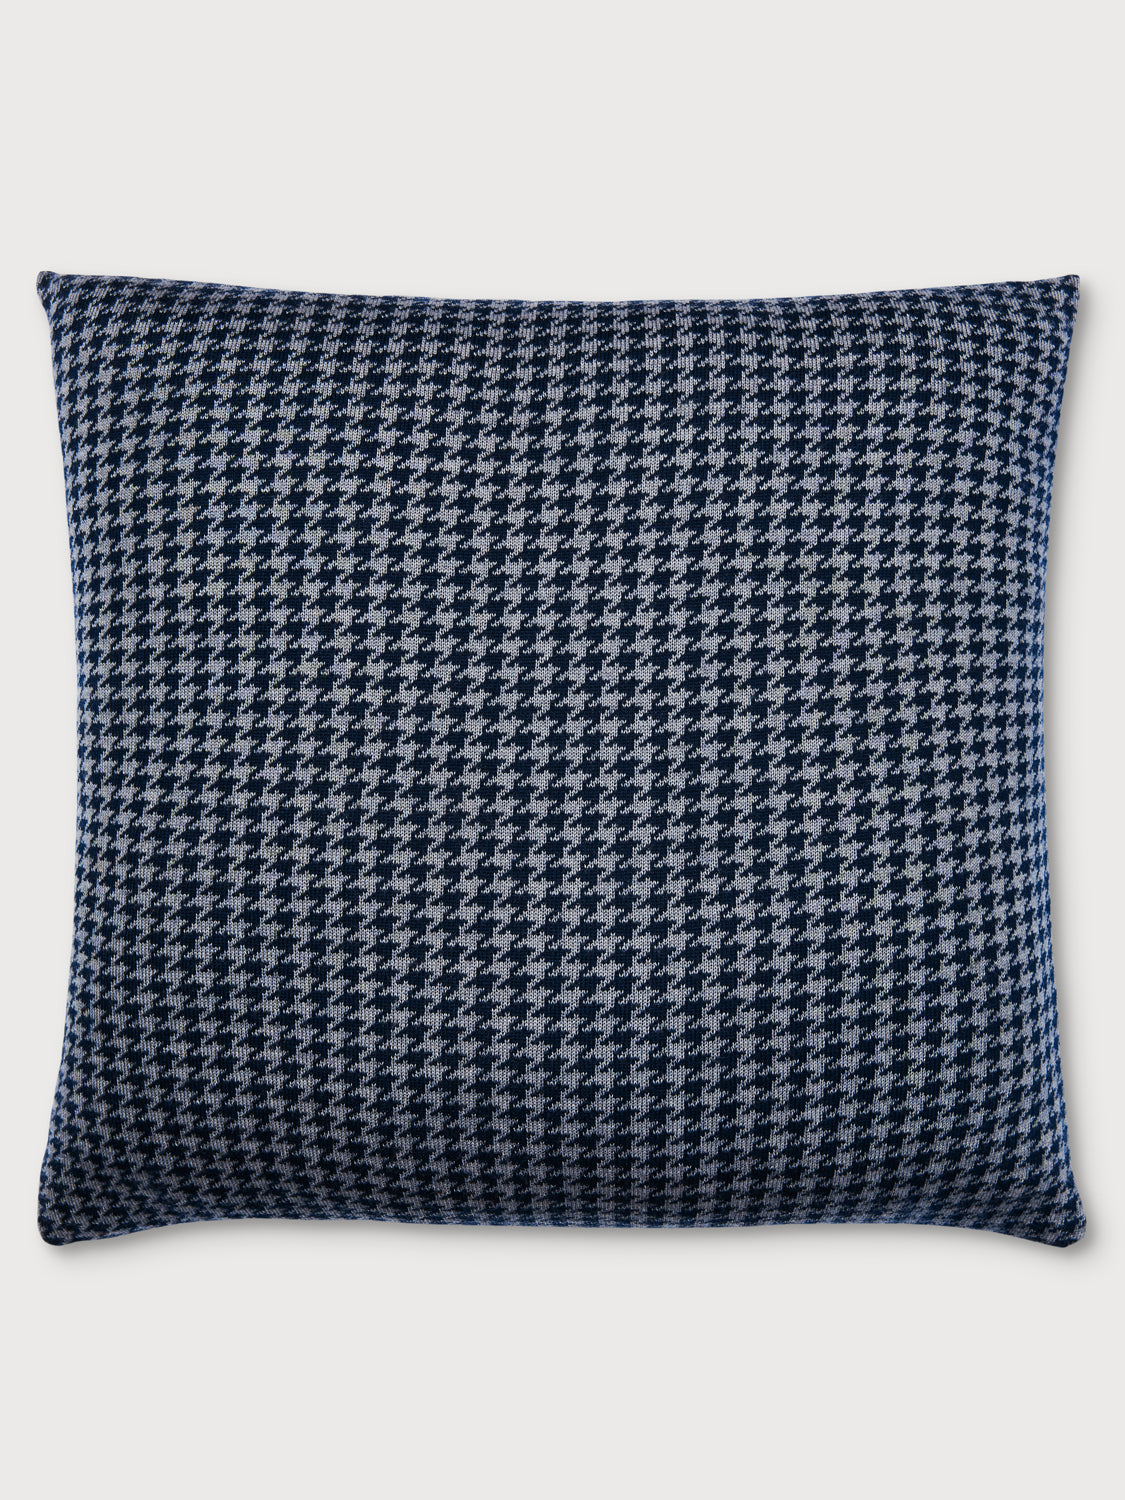 Houndstooth Dark Navy and Space Grey Cushion